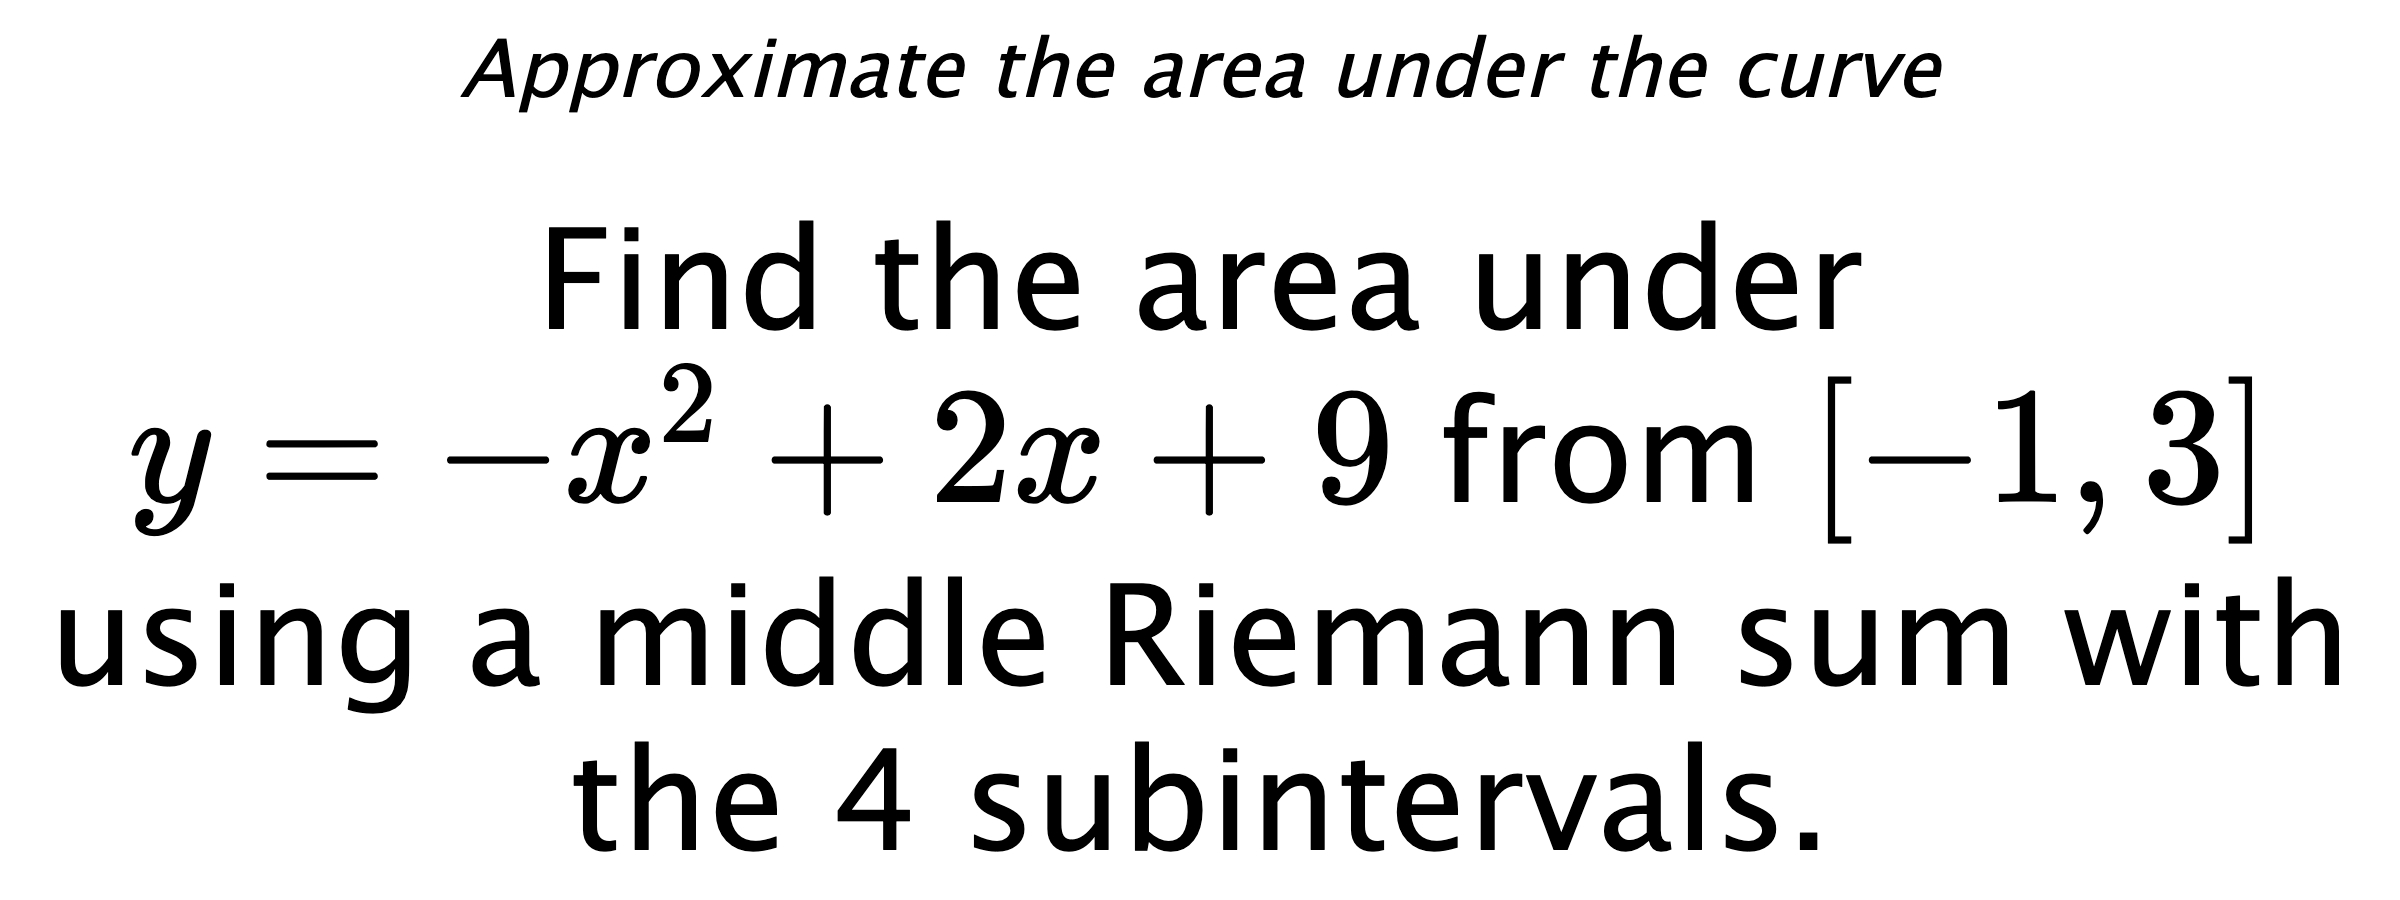 Approximate the area under the curve Find the area under $ y=-x^2+2x+9 $ from $ [-1,3] $ using a middle Riemann sum with the 4 subintervals.